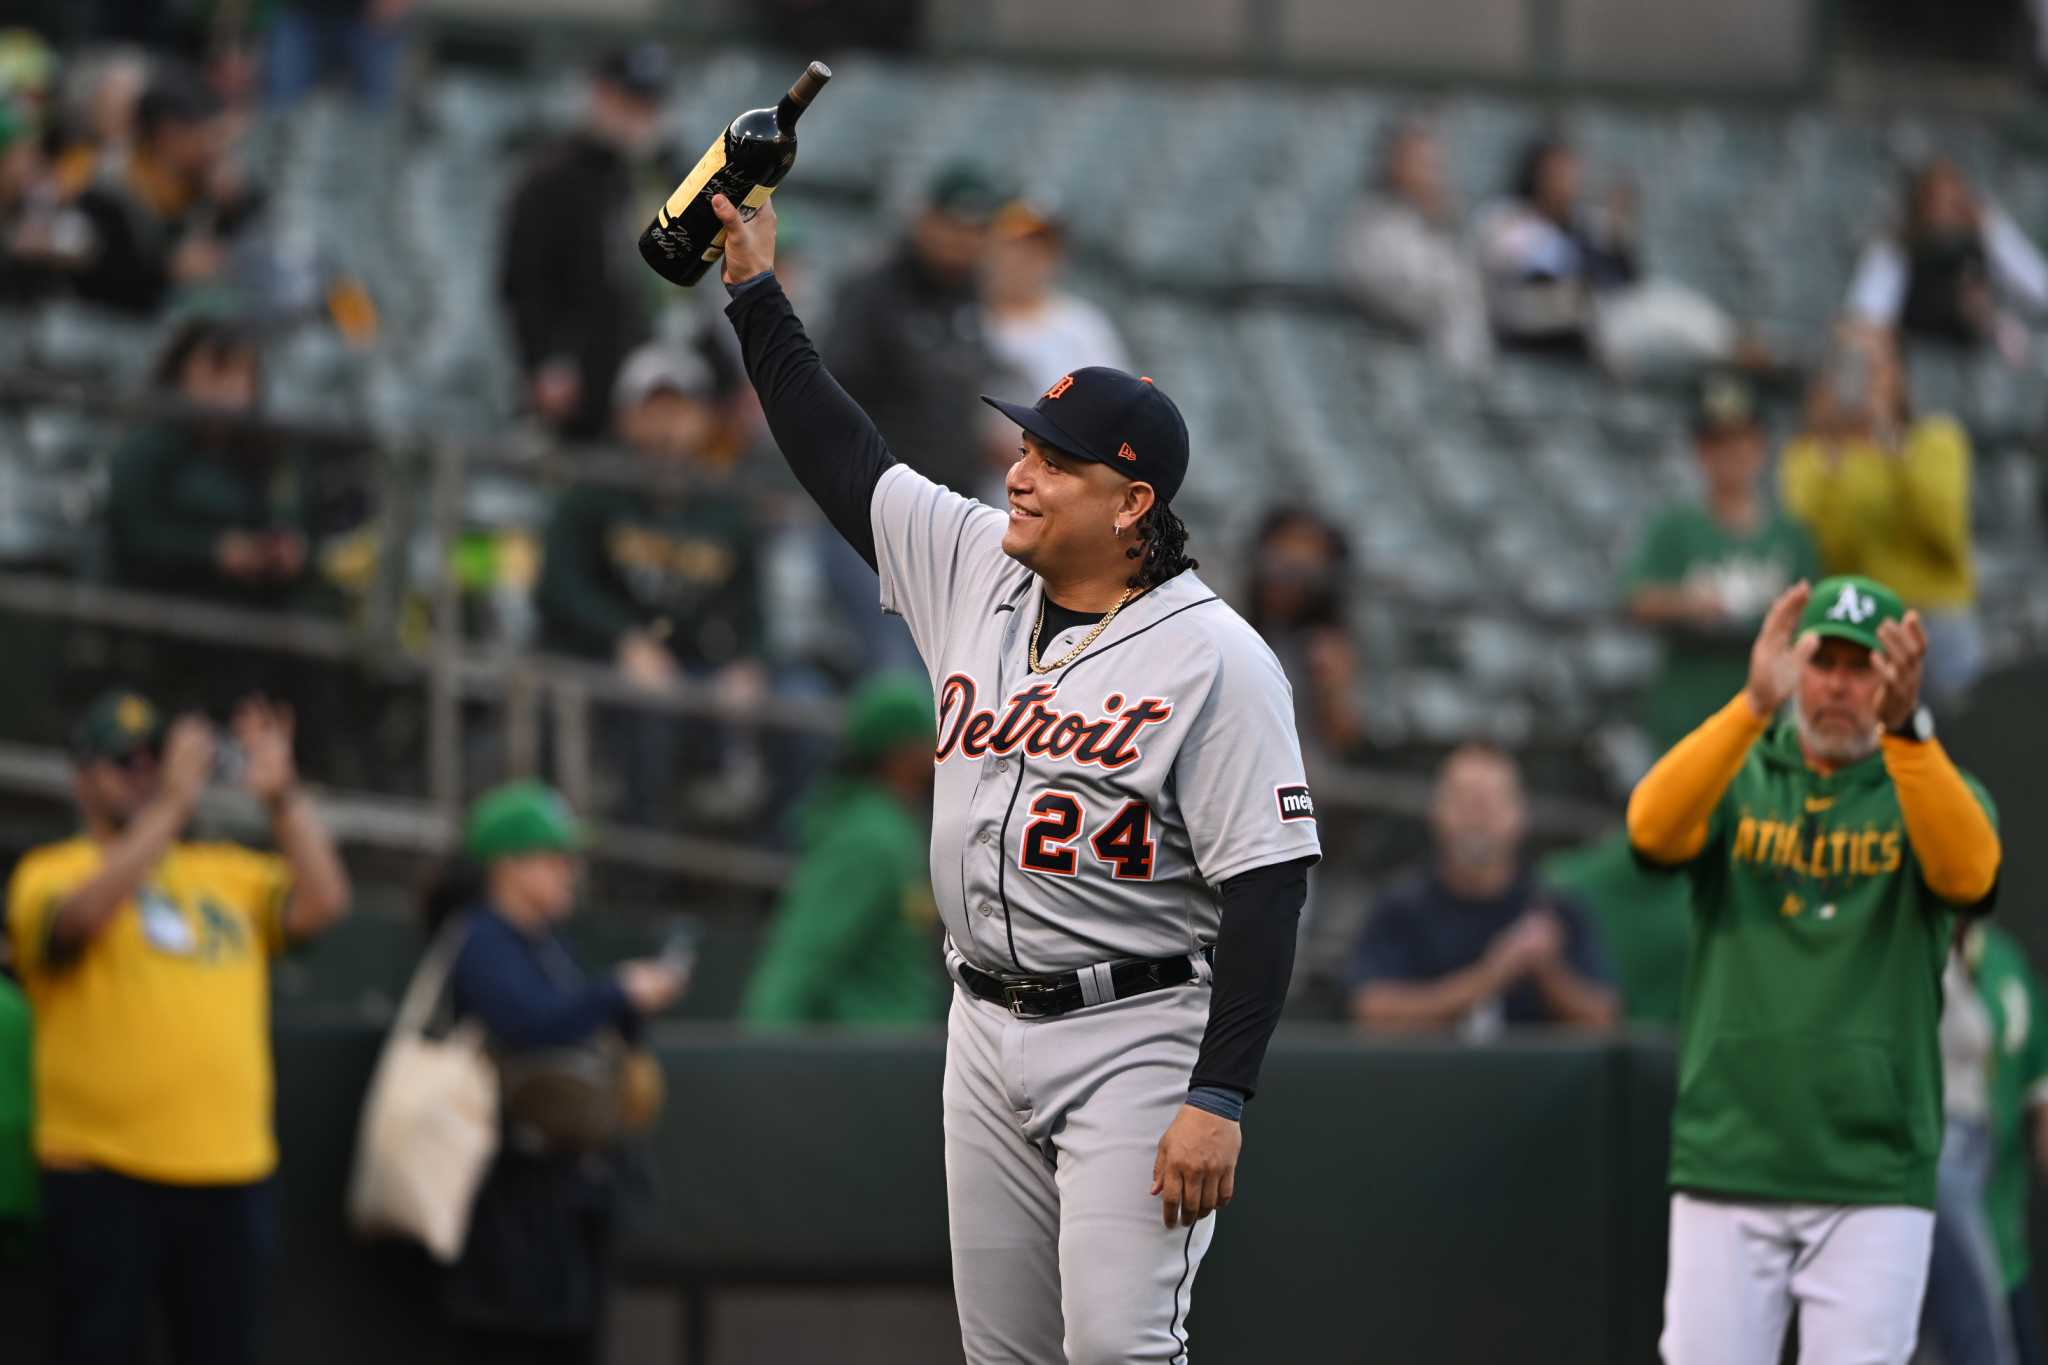 2021 Detroit Tigers' roster, payroll, service time, and options